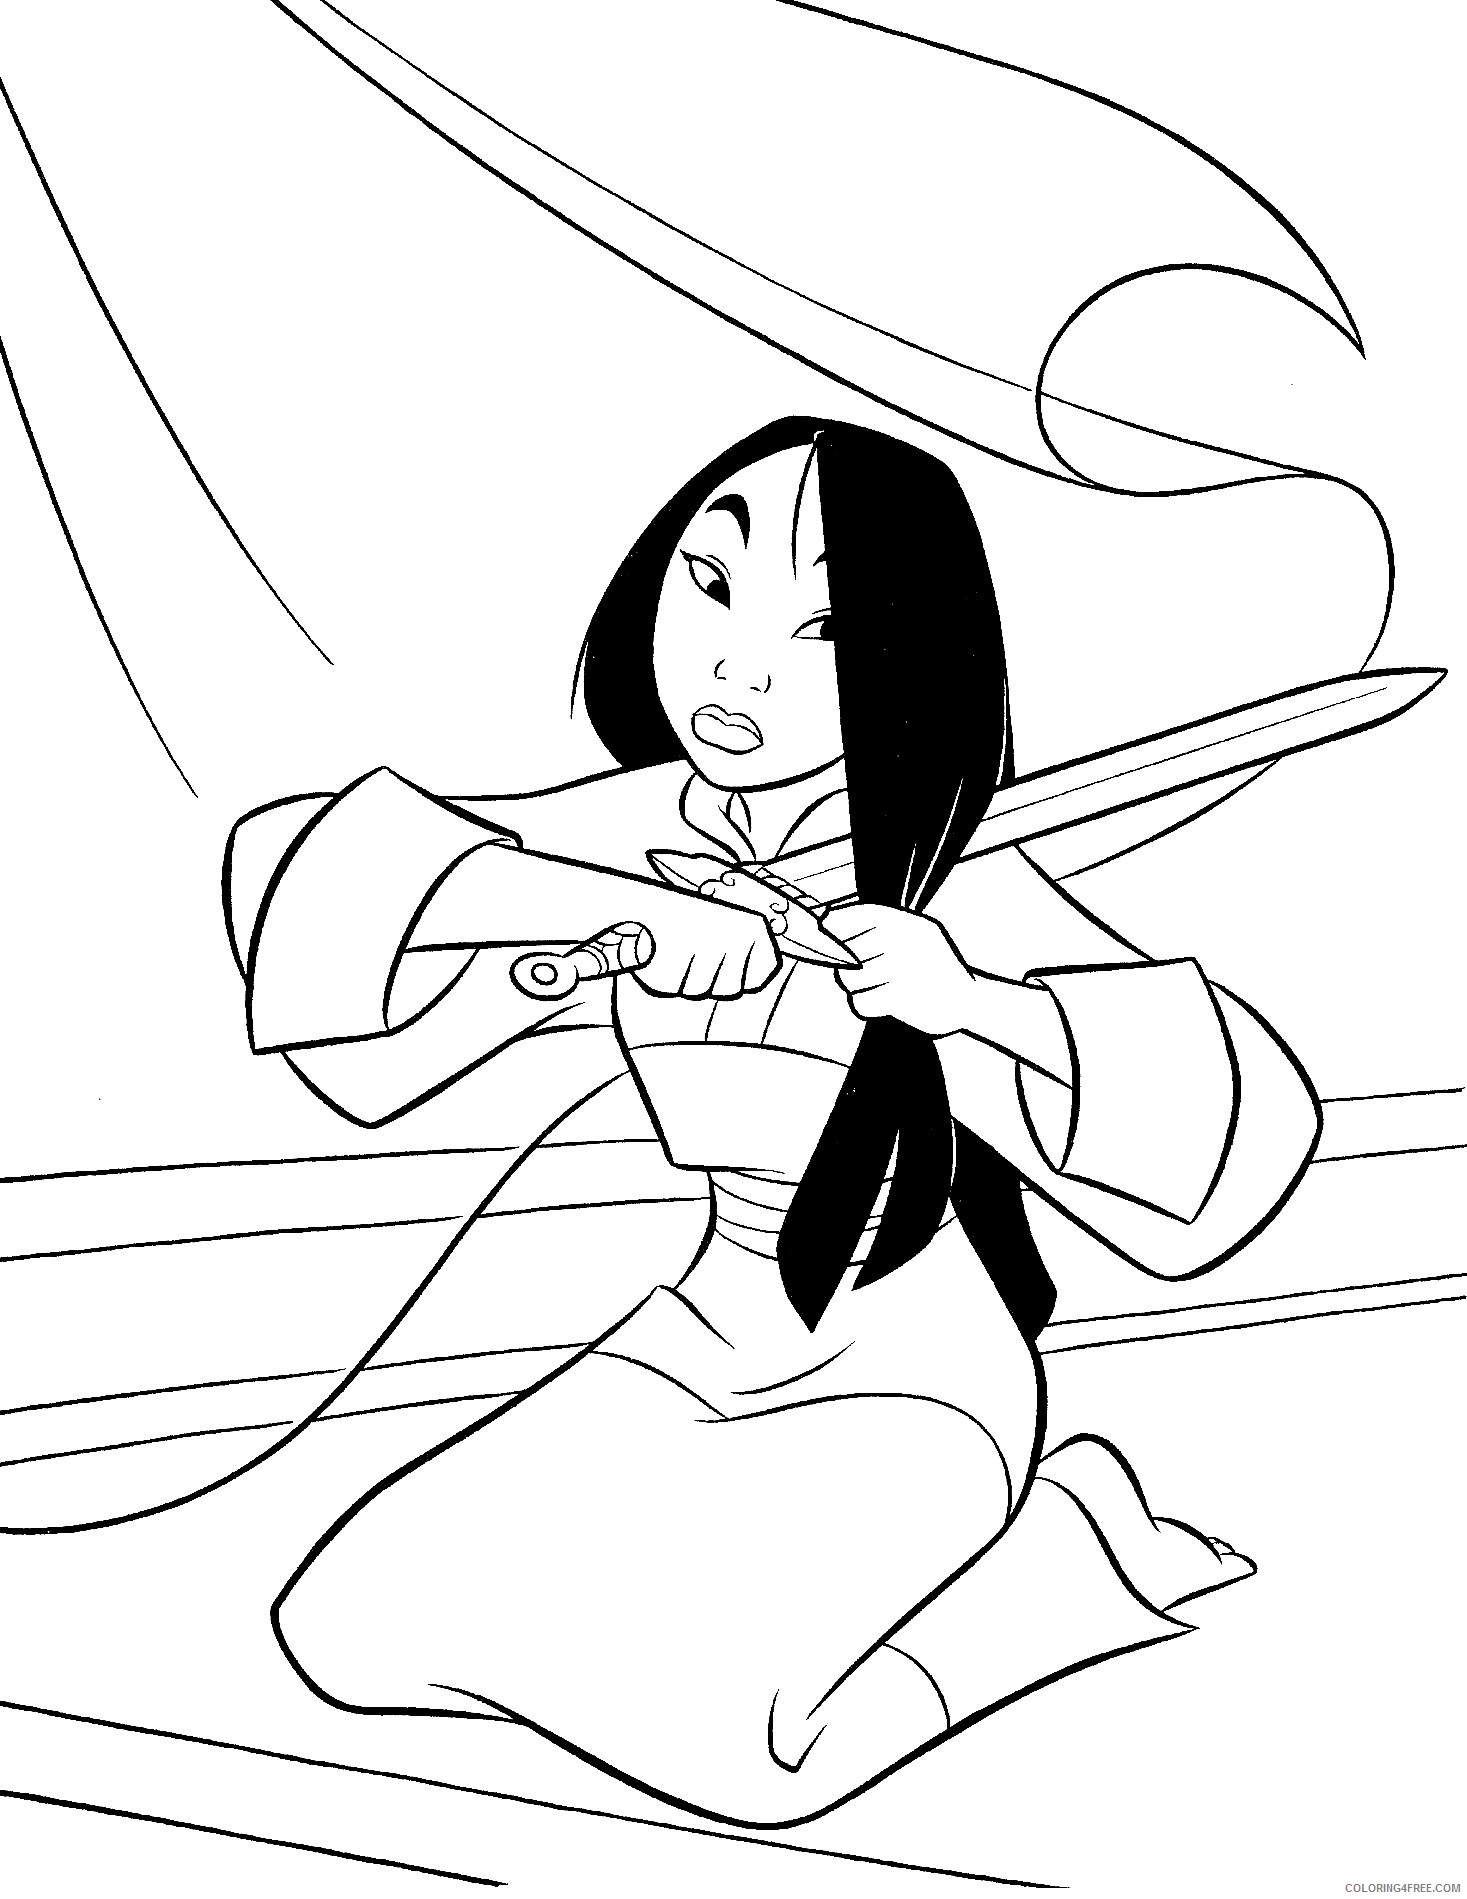 mulan coloring pages cutting hair Coloring4free